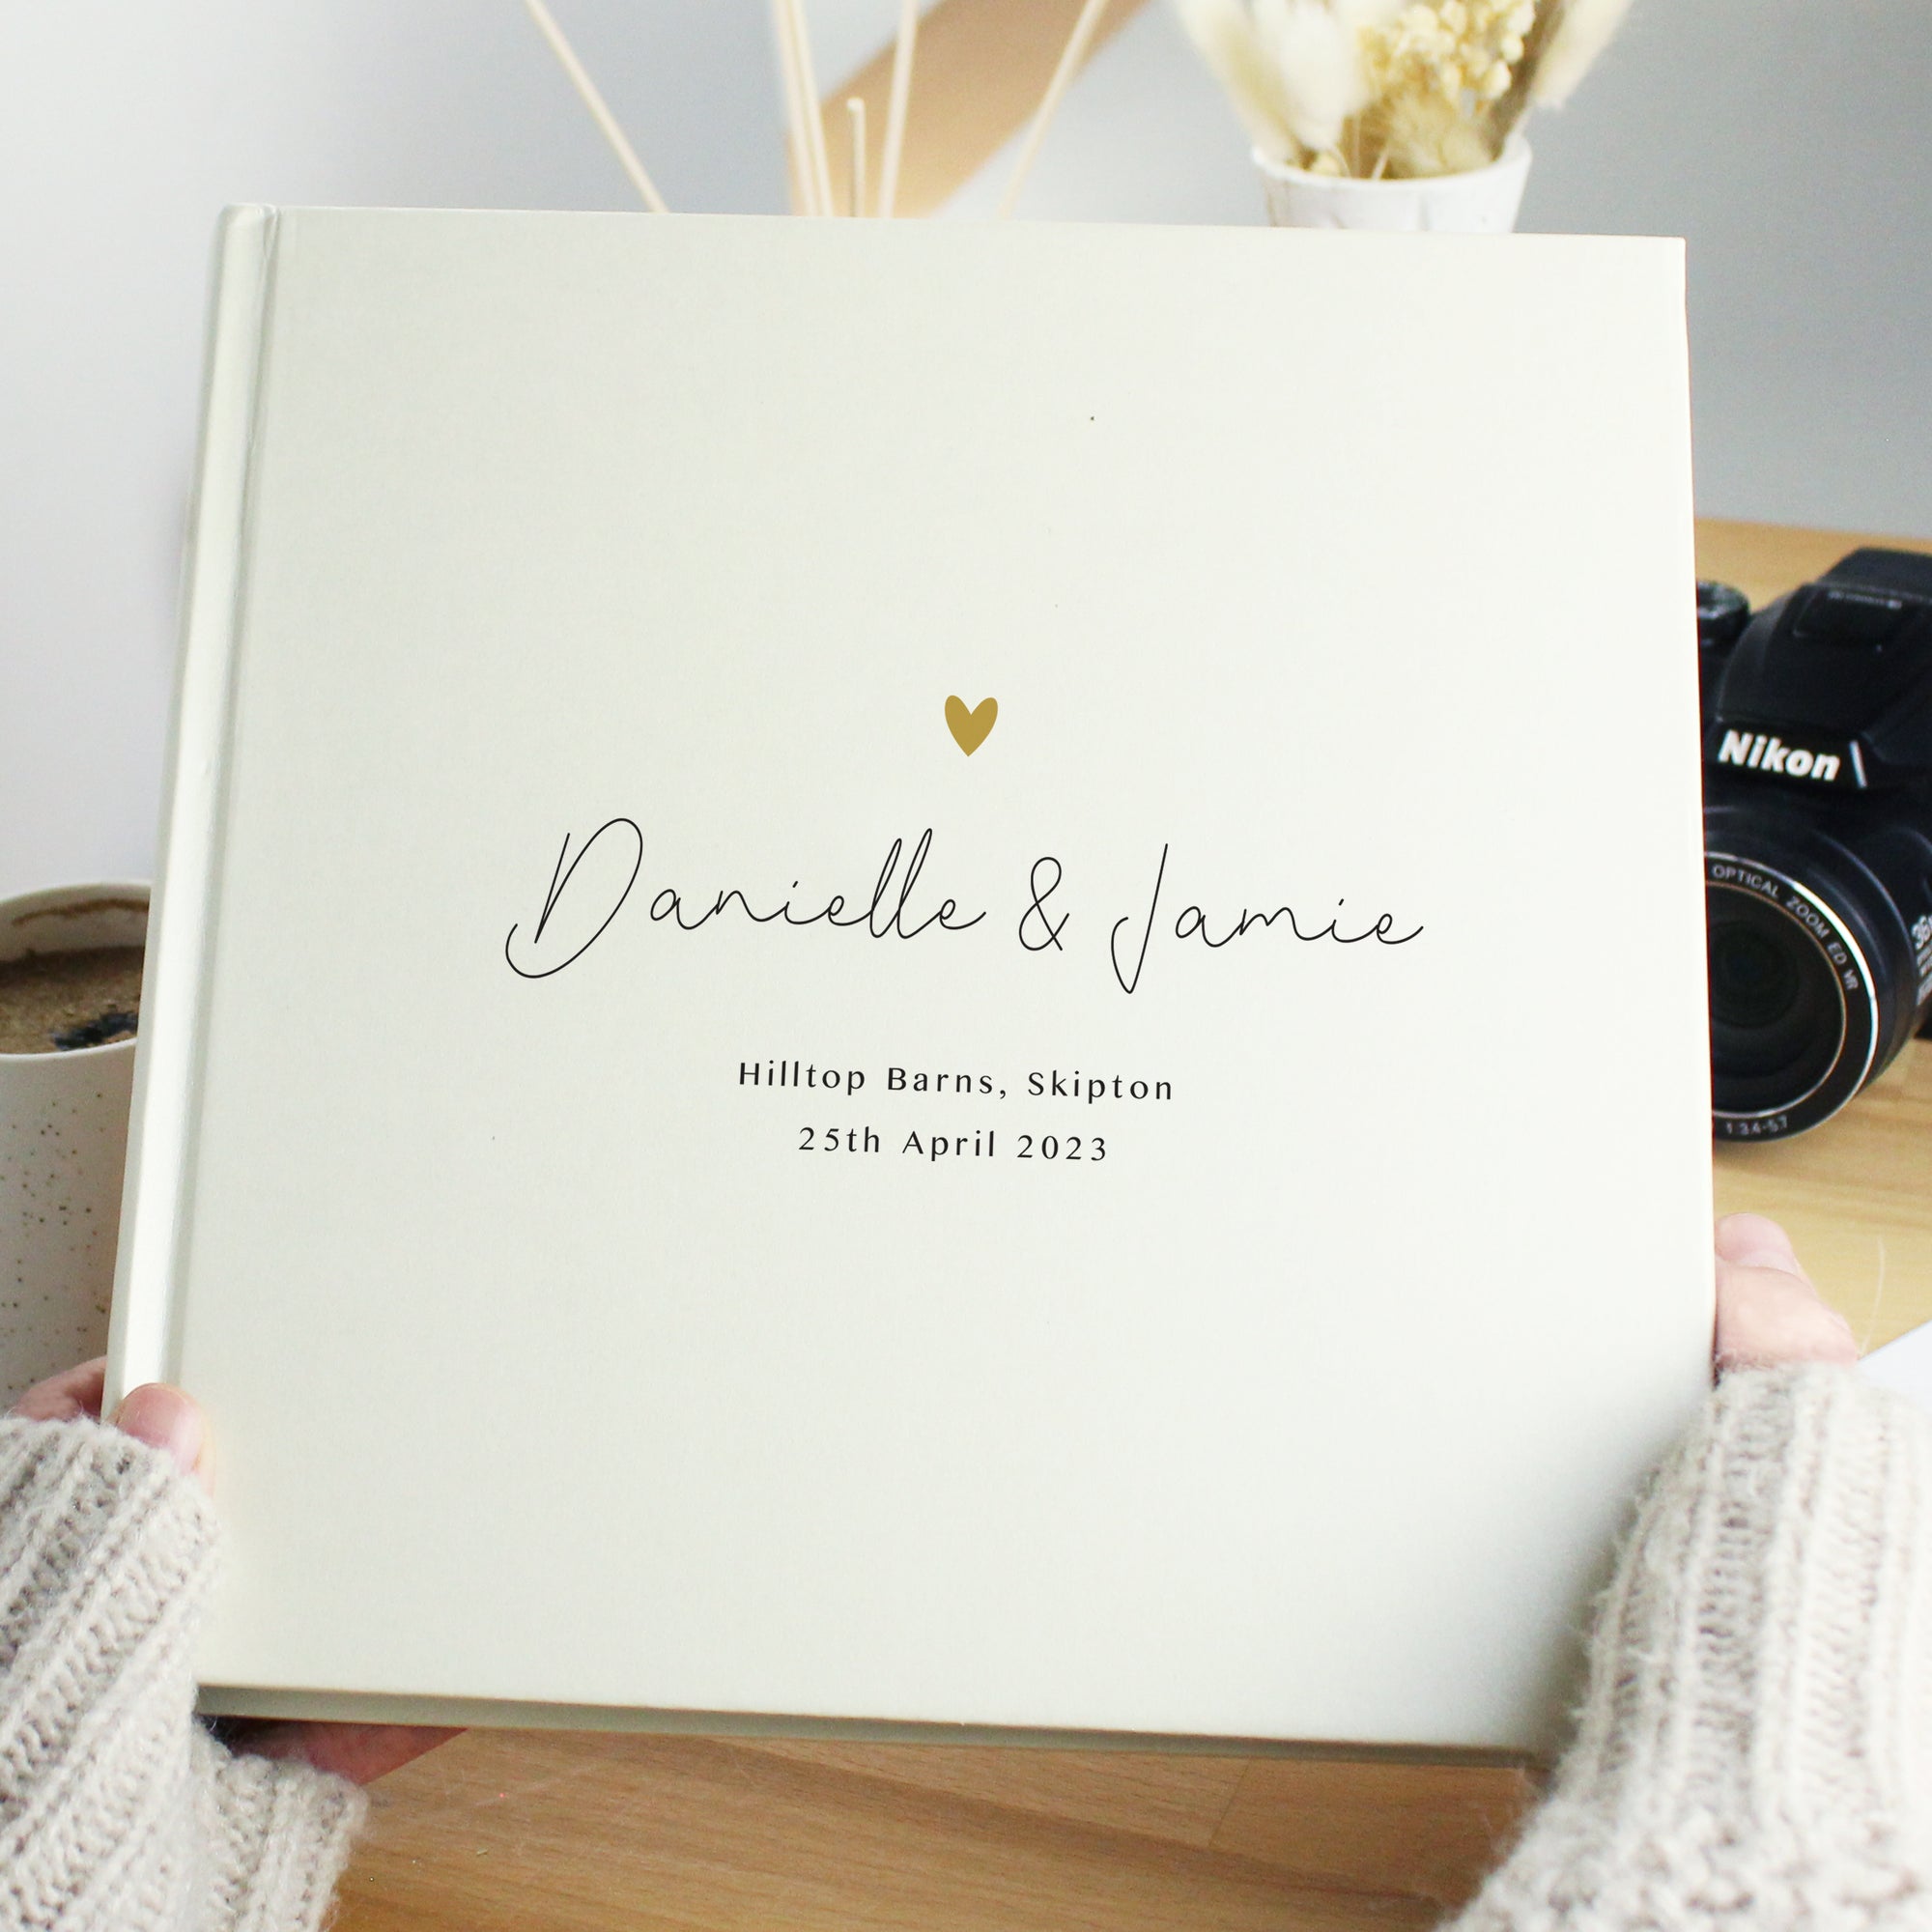 Image of a white square photo album that can hold up to 120 6" by 4" photos. The cover of the album features a small golden heart and beneath it you can add your own text over 3 lines. The text on the first line will appear in a large script font.